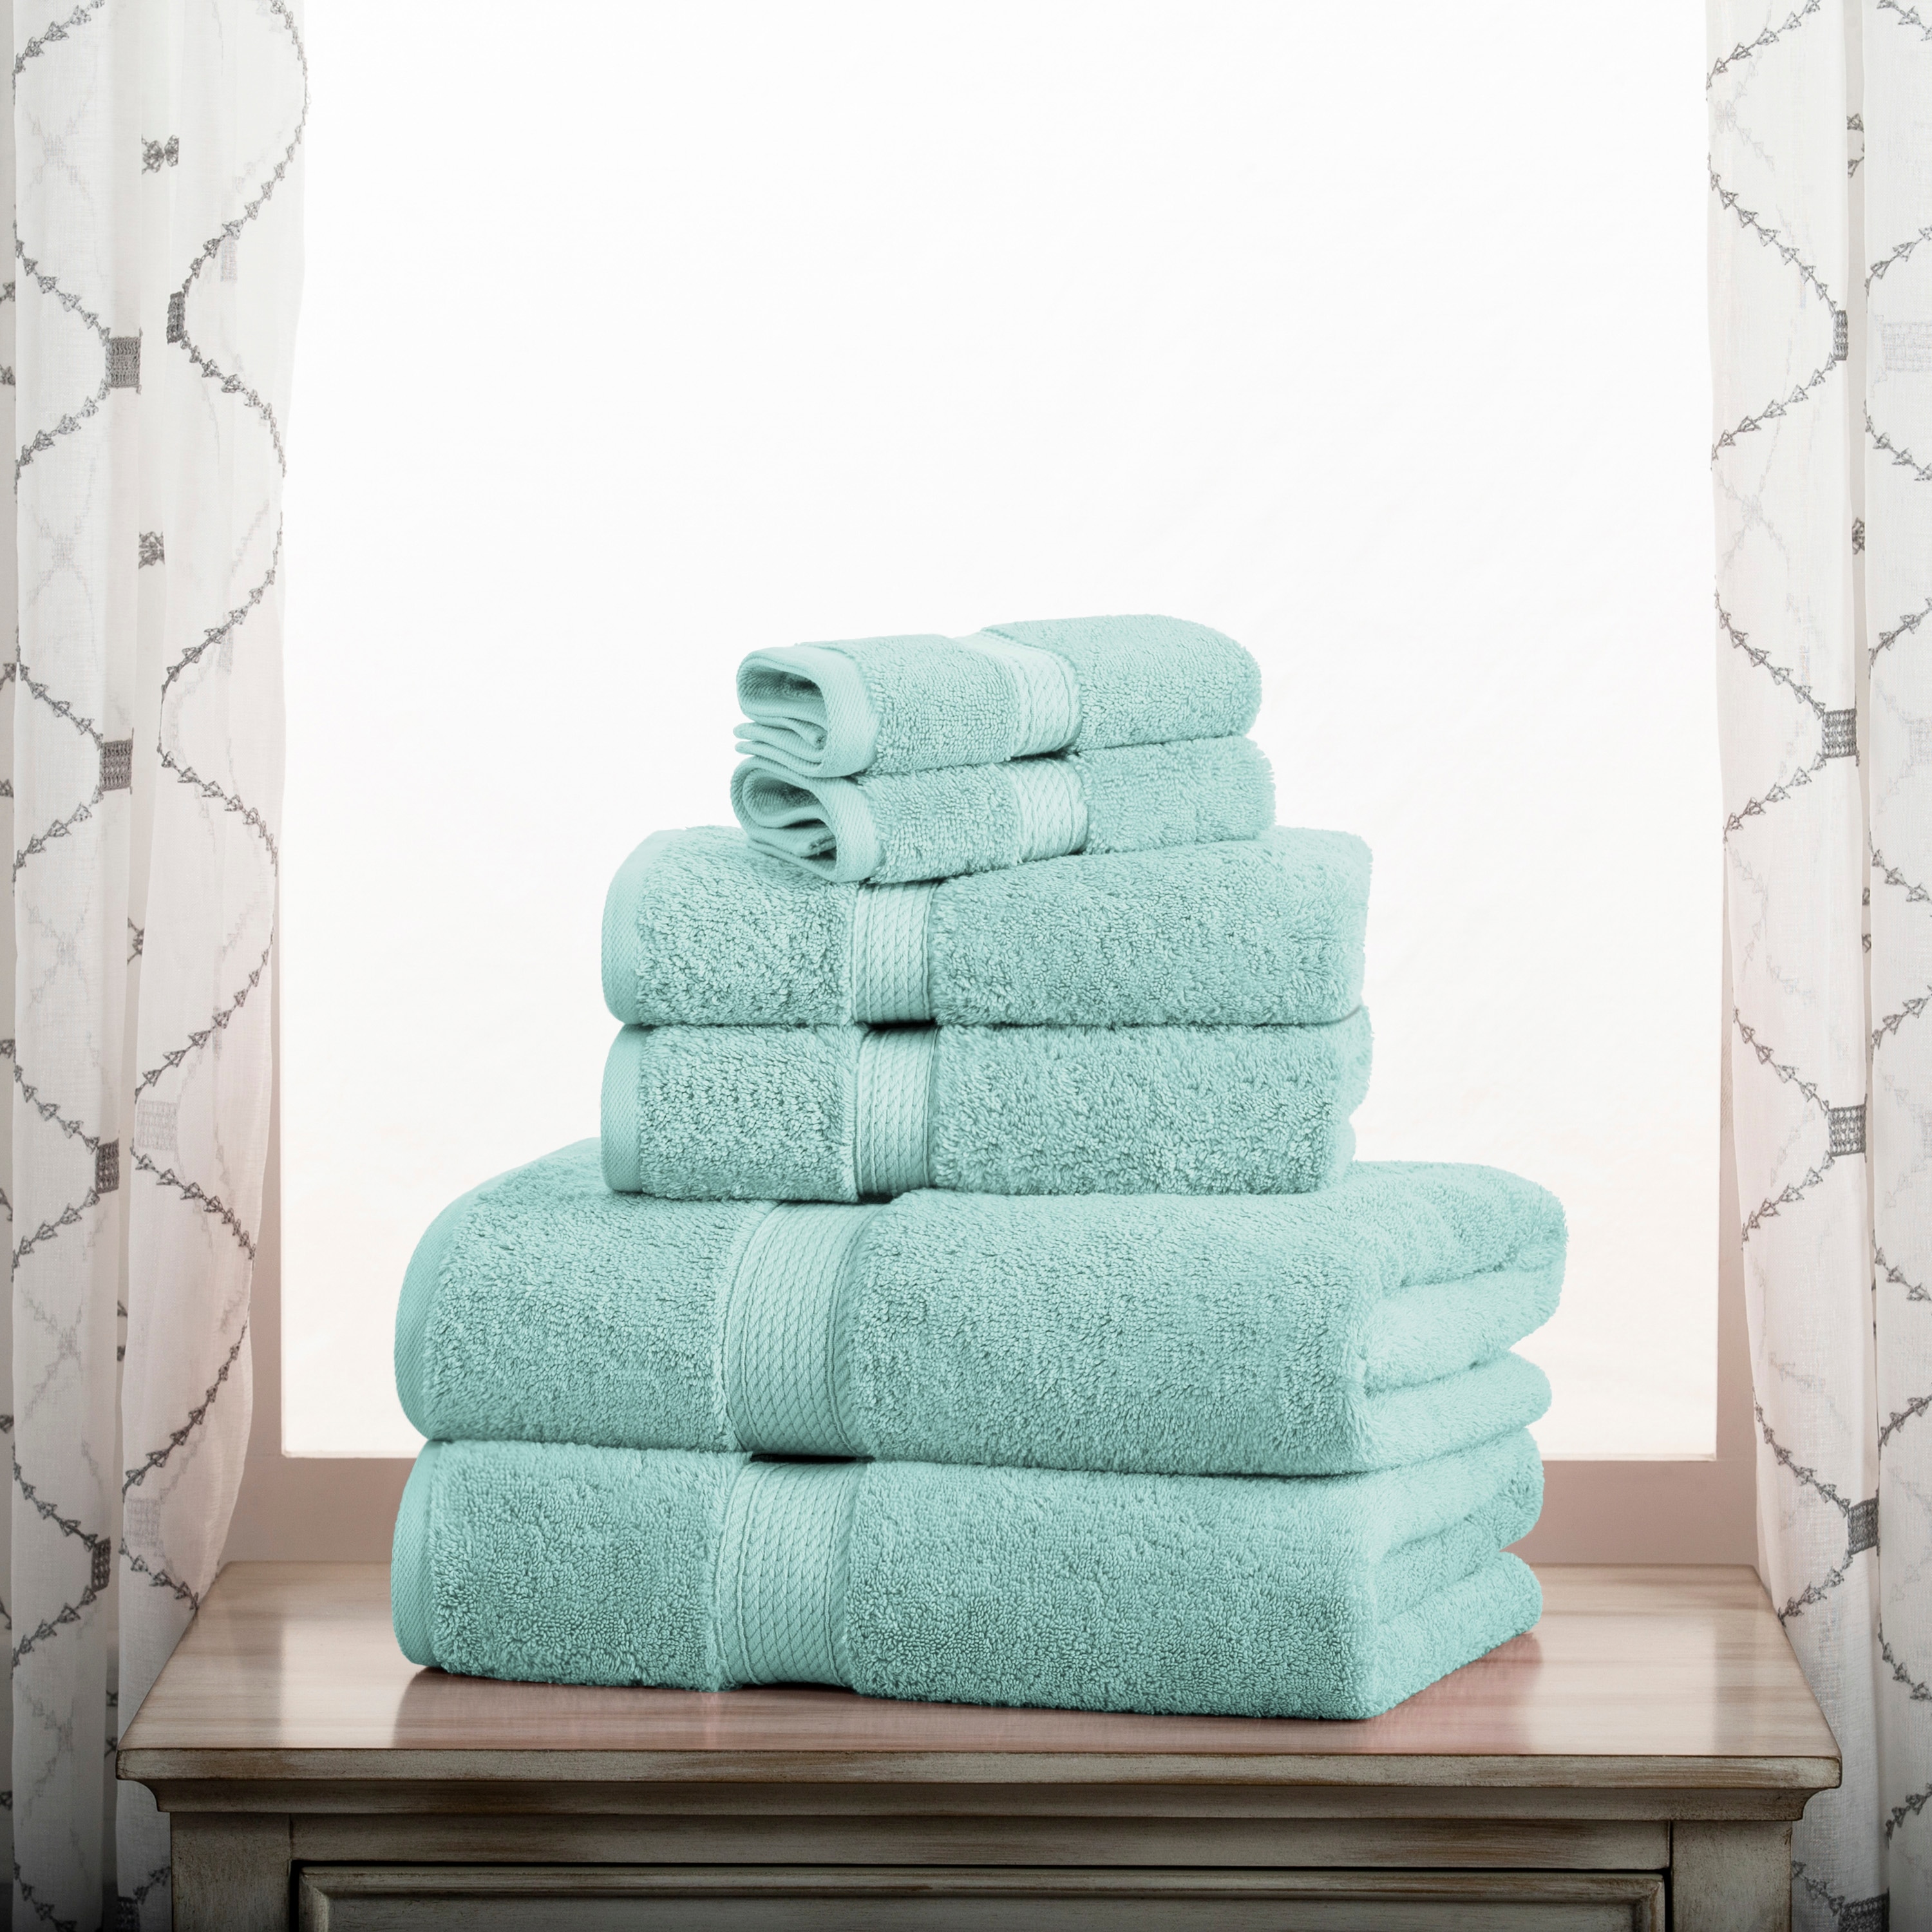 https://ak1.ostkcdn.com/images/products/is/images/direct/9e636c2845c477b7e5fadd3eaa5d4c7dfbc7f237/Egyptian-Cotton-Heavyweight-Solid-Plush-Towel-Set-by-Superior.jpg